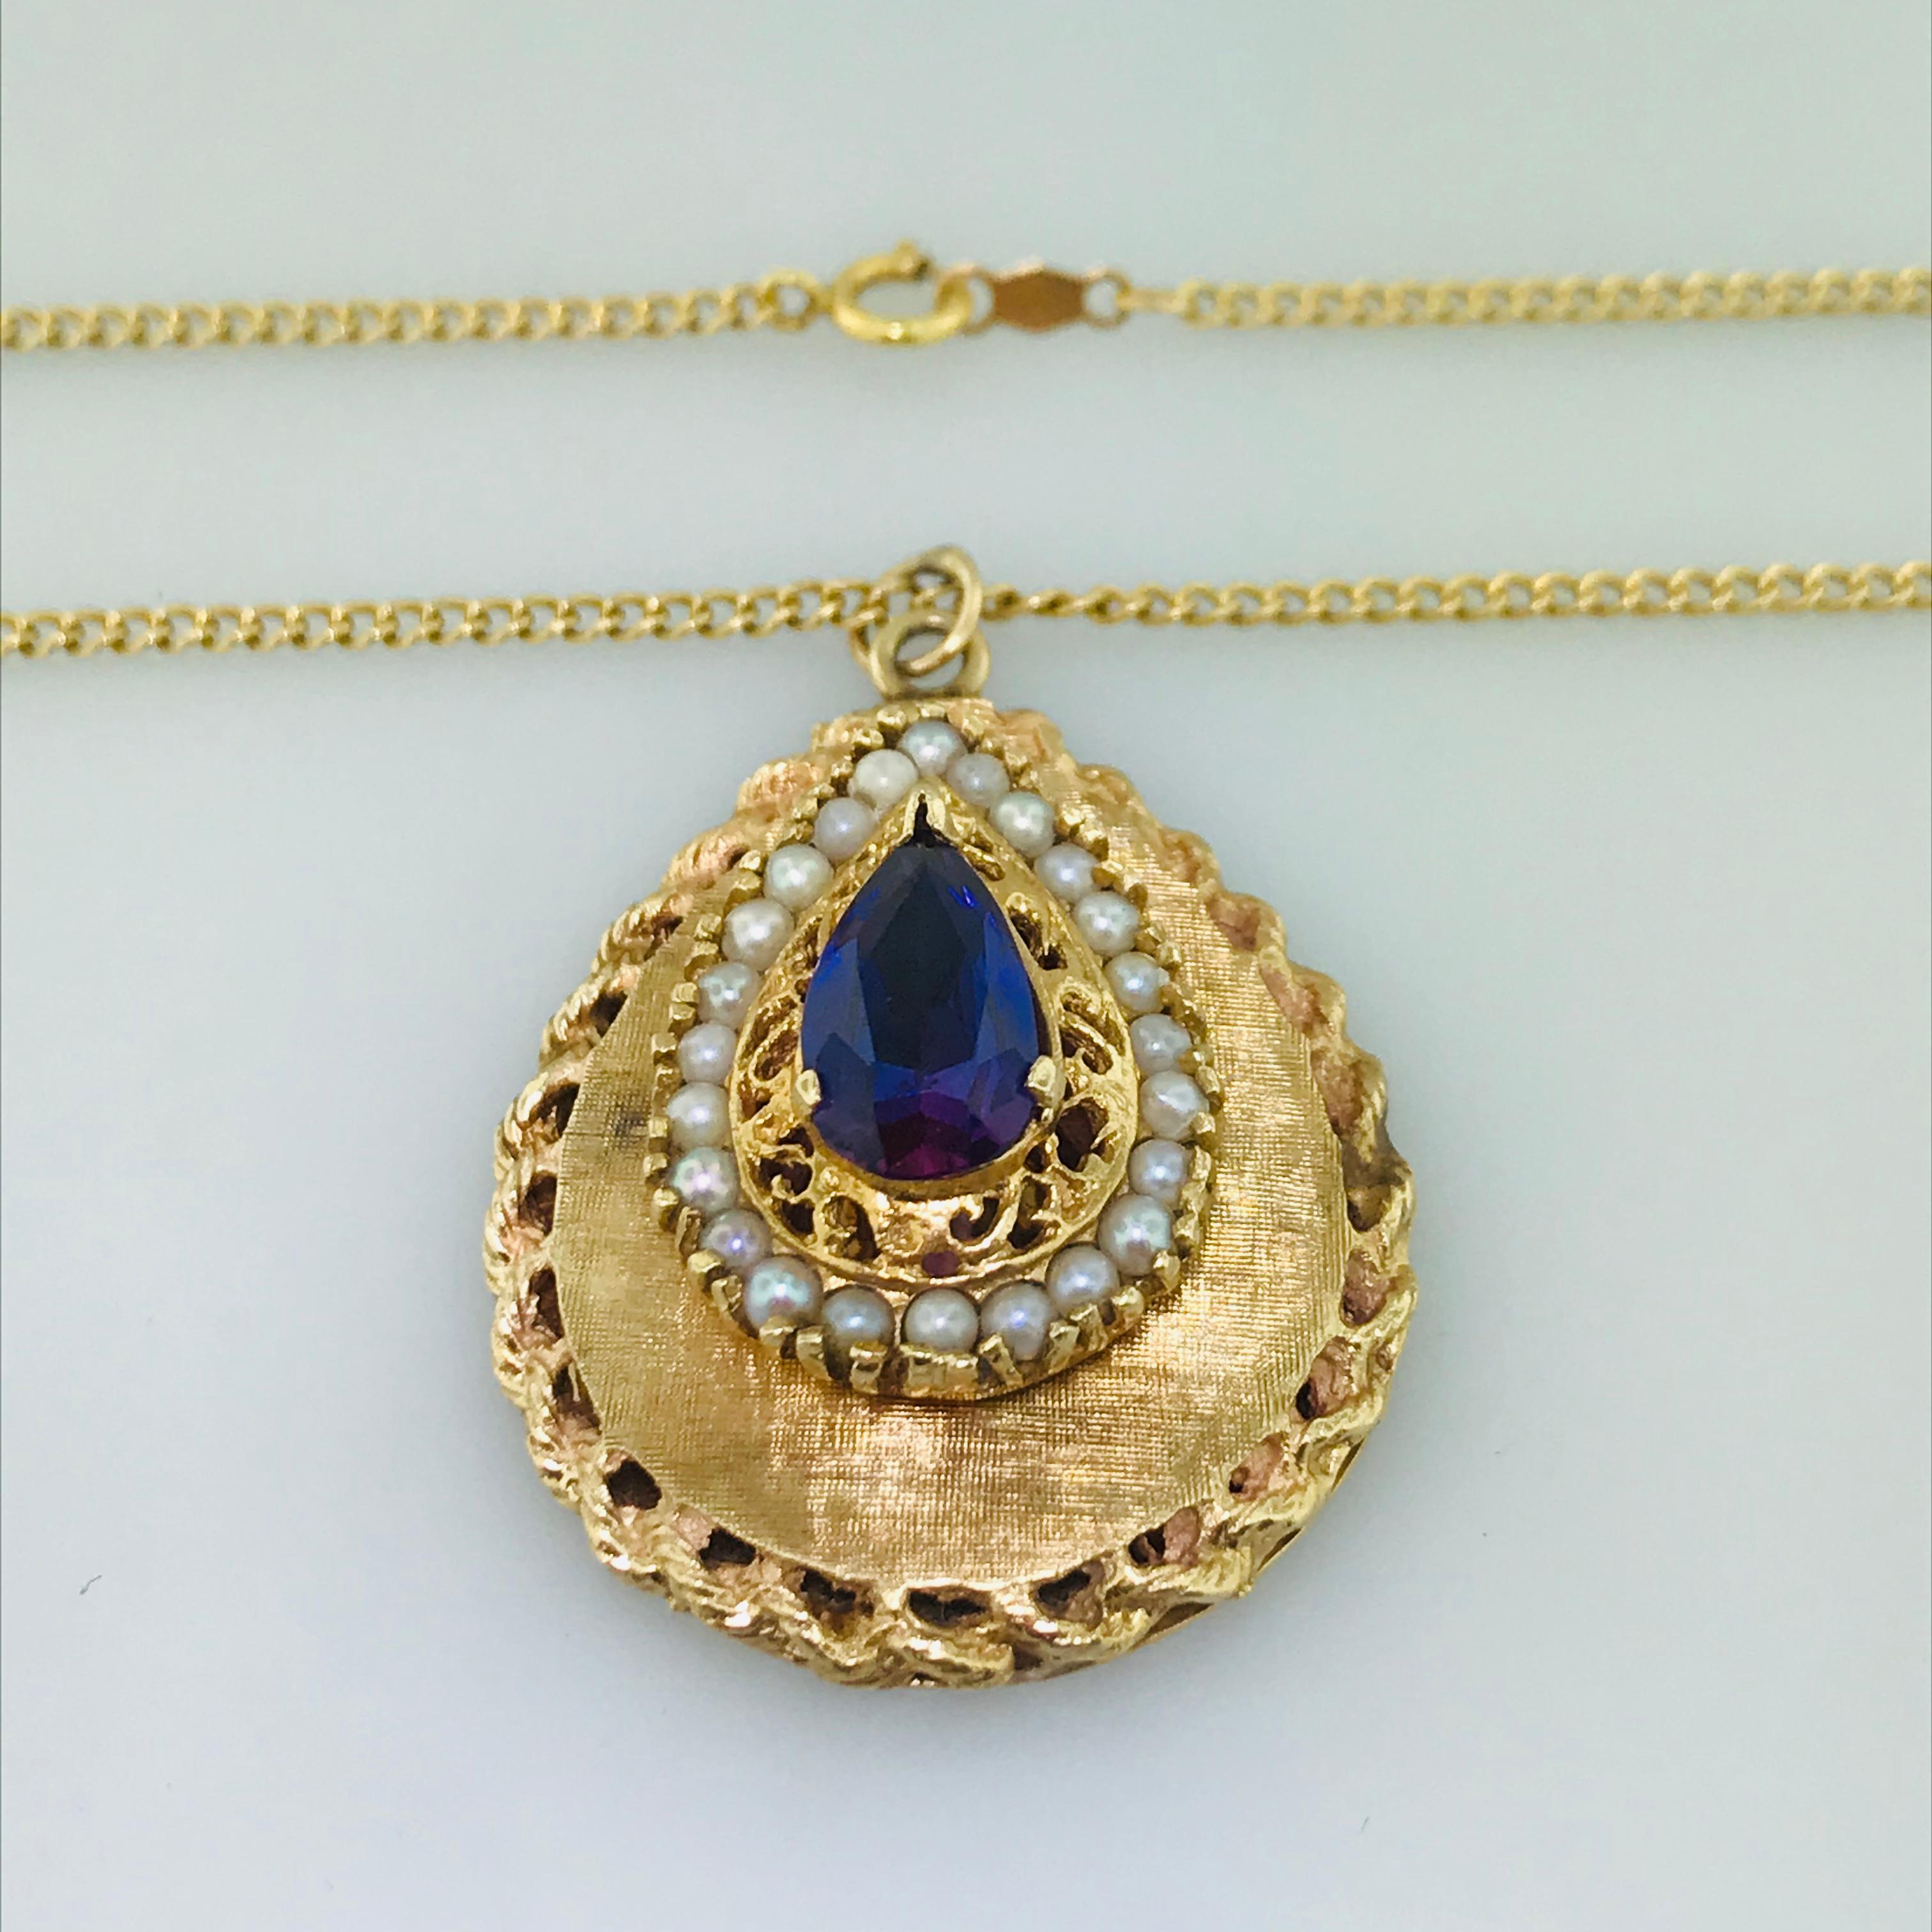 Estate Vintage Locket Pear Shape Amethyst Seed Pearl Pendant with Chain 14K Gold 2